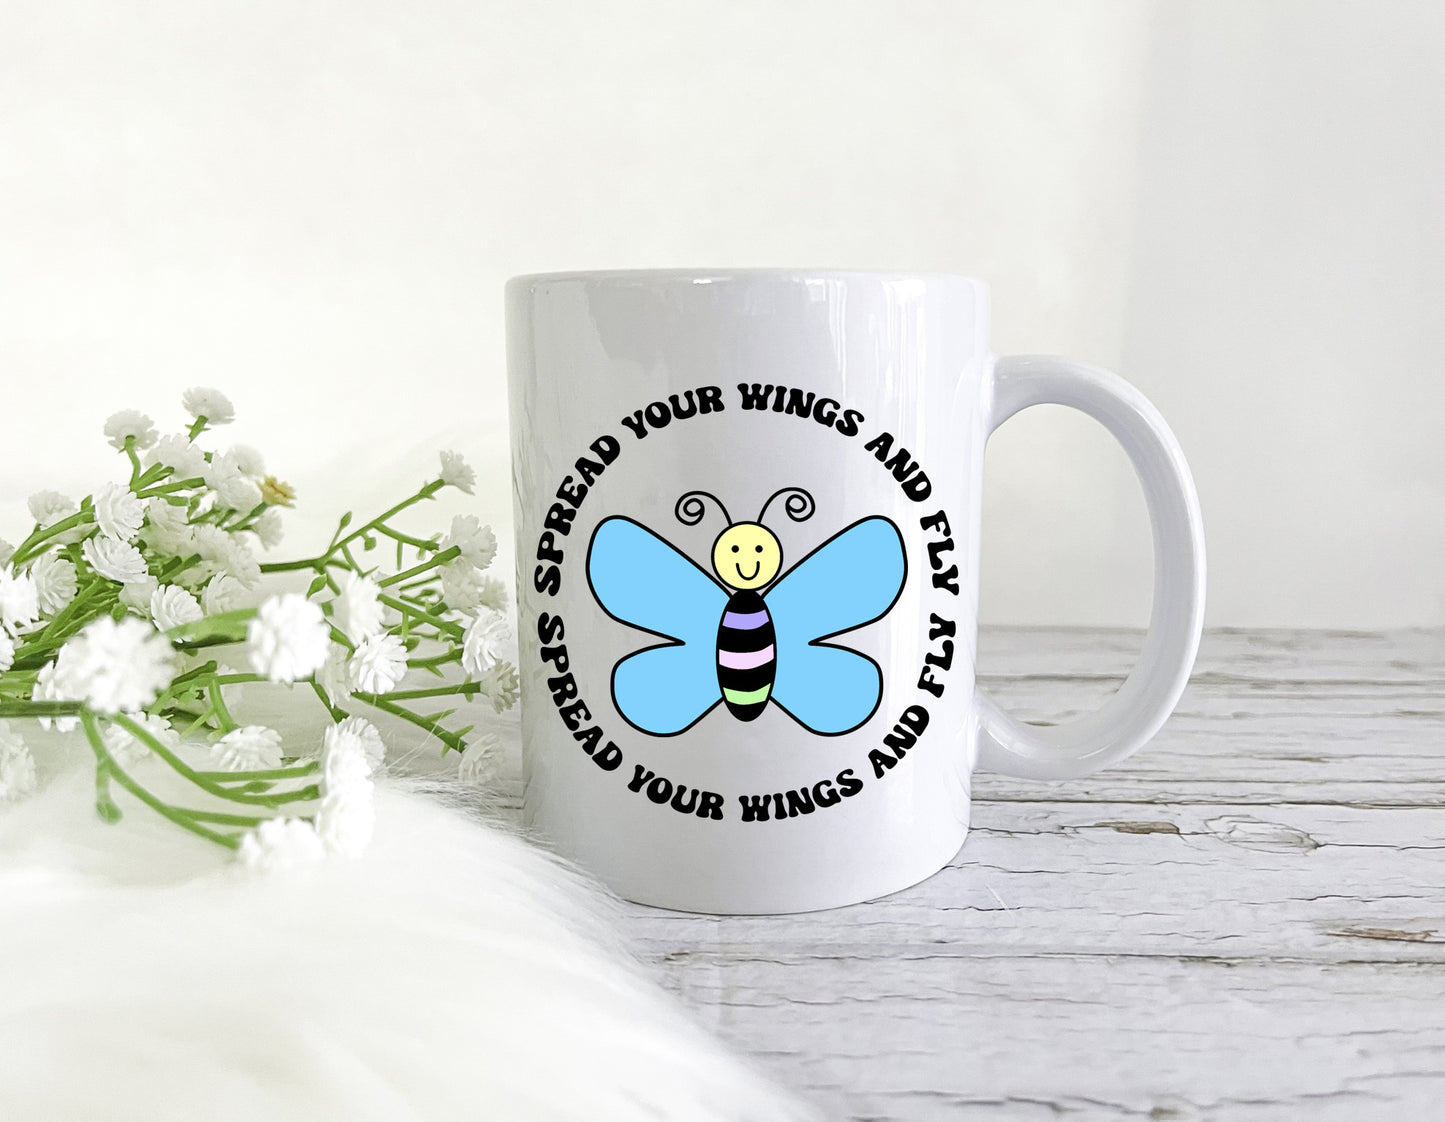 Spread Your Wings & Fly Mug